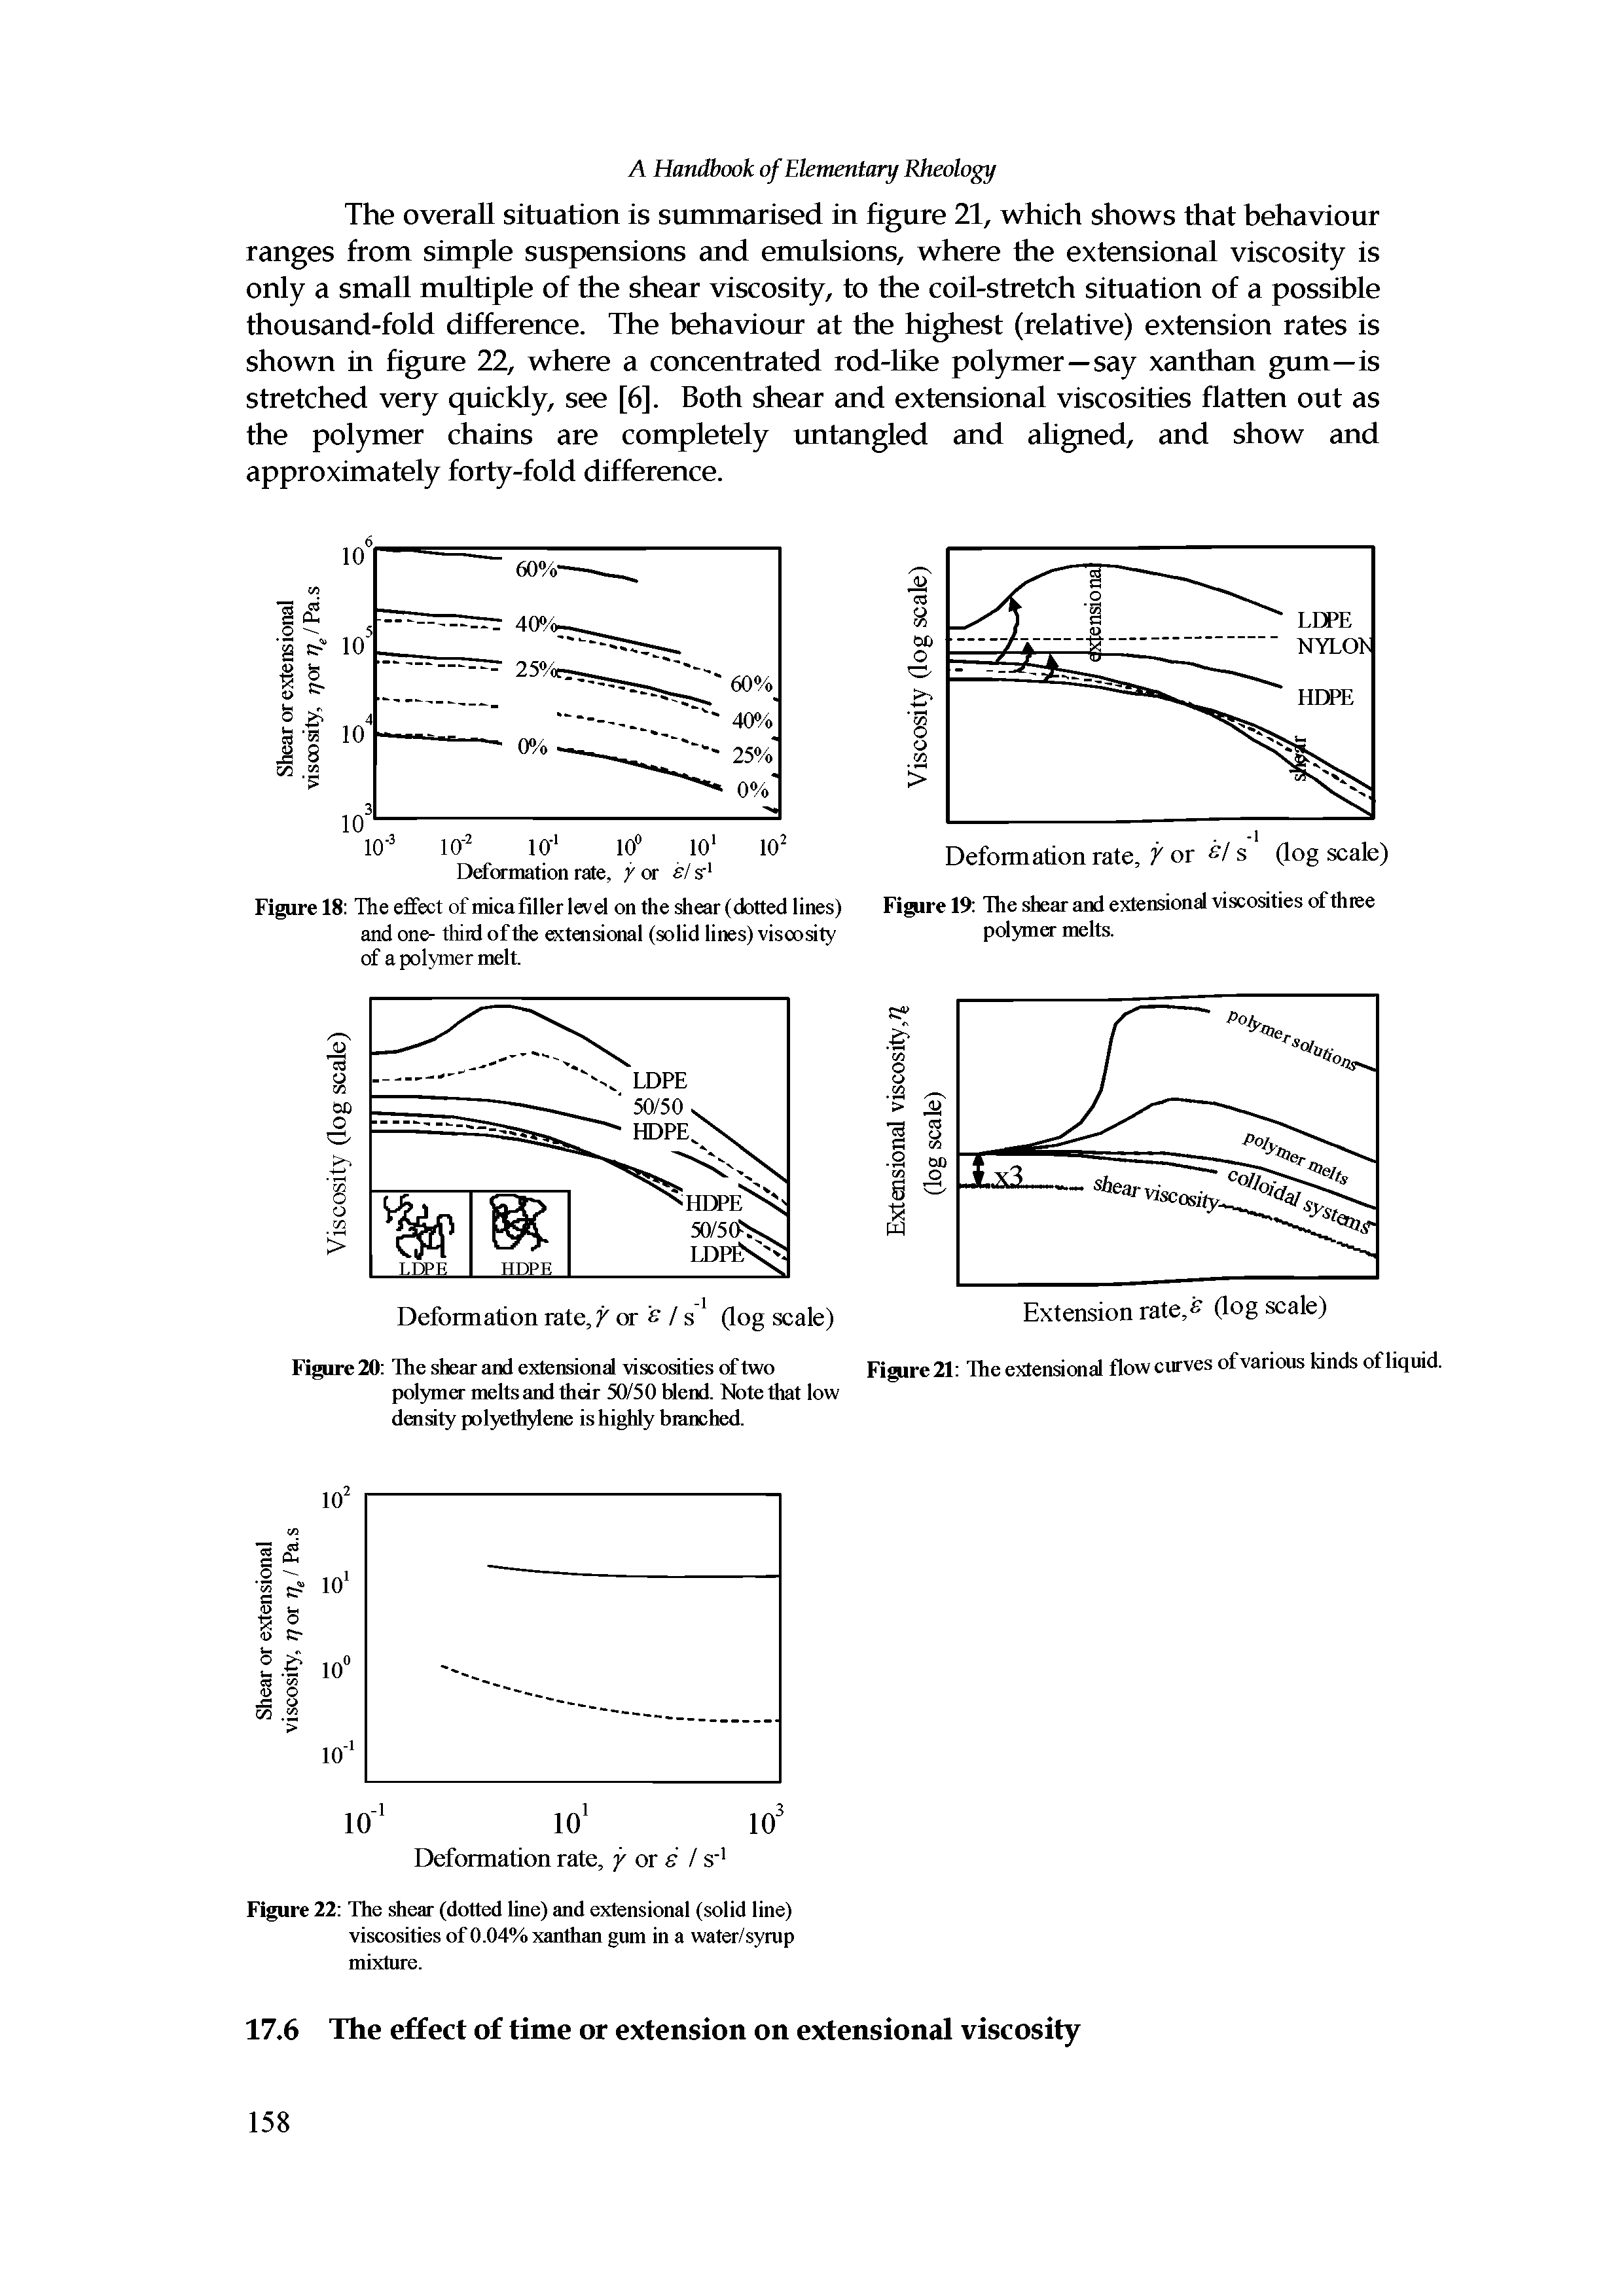 Figure 19 The shear and extensional viscosities of three polymer melts.